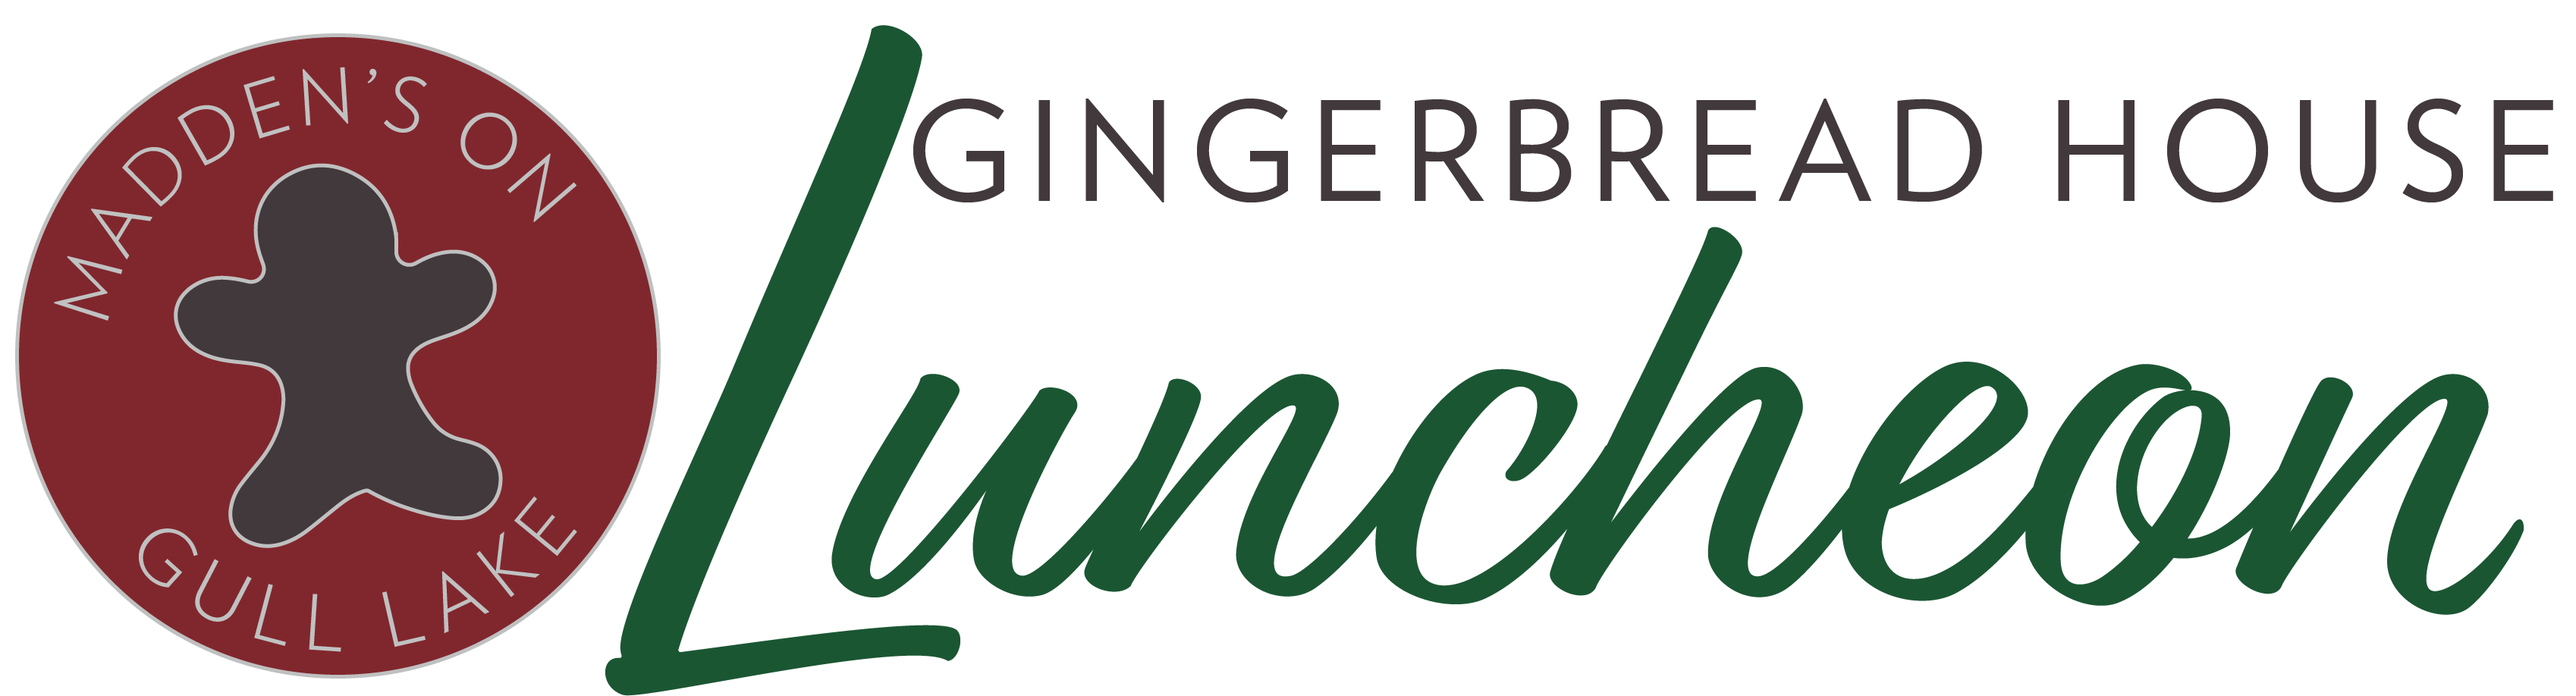 Gingerbread House Luncheon logo